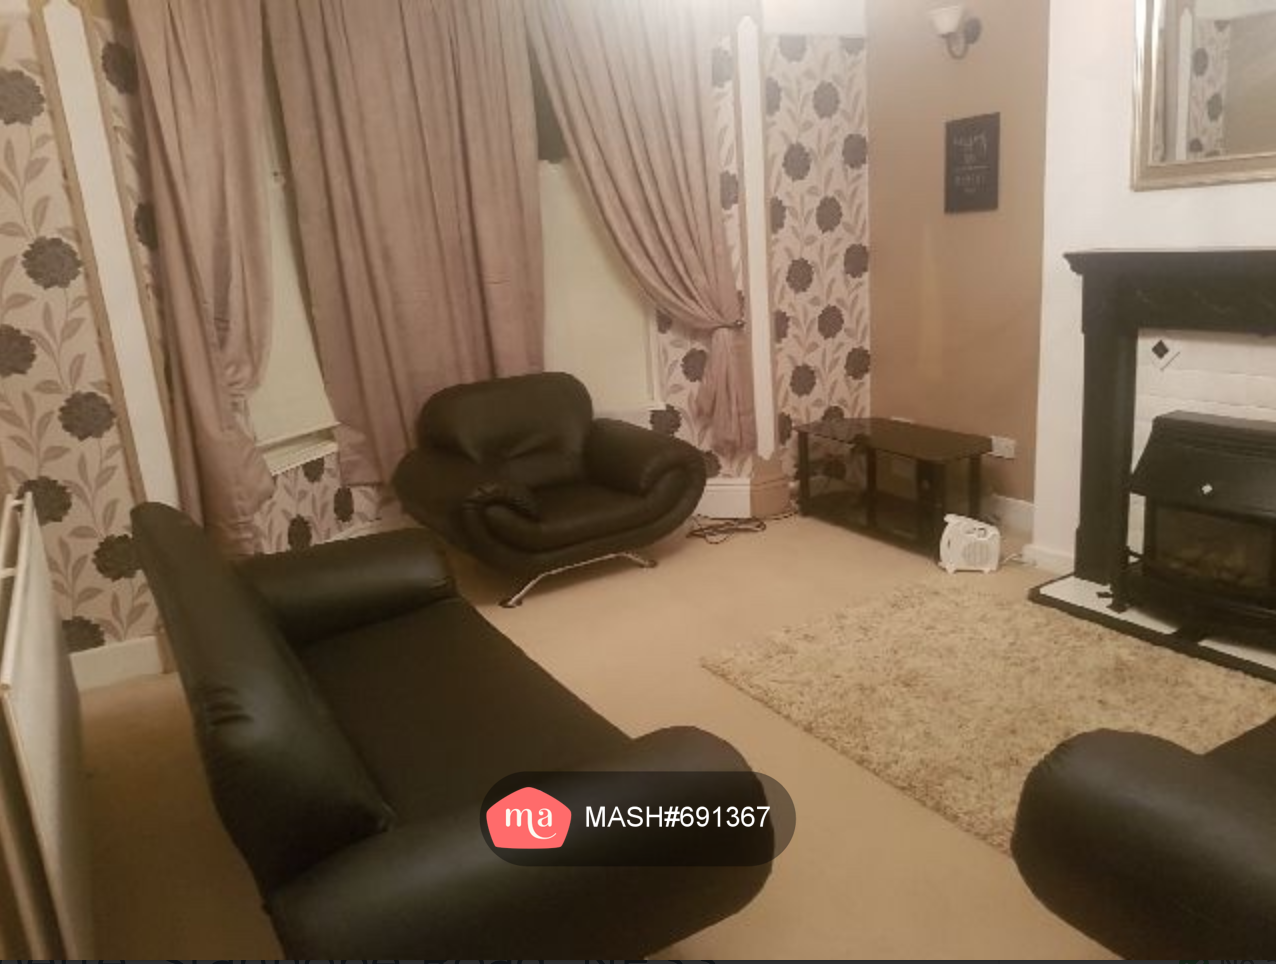 4 Bedroom Flat to rent in South shields - Mashroom